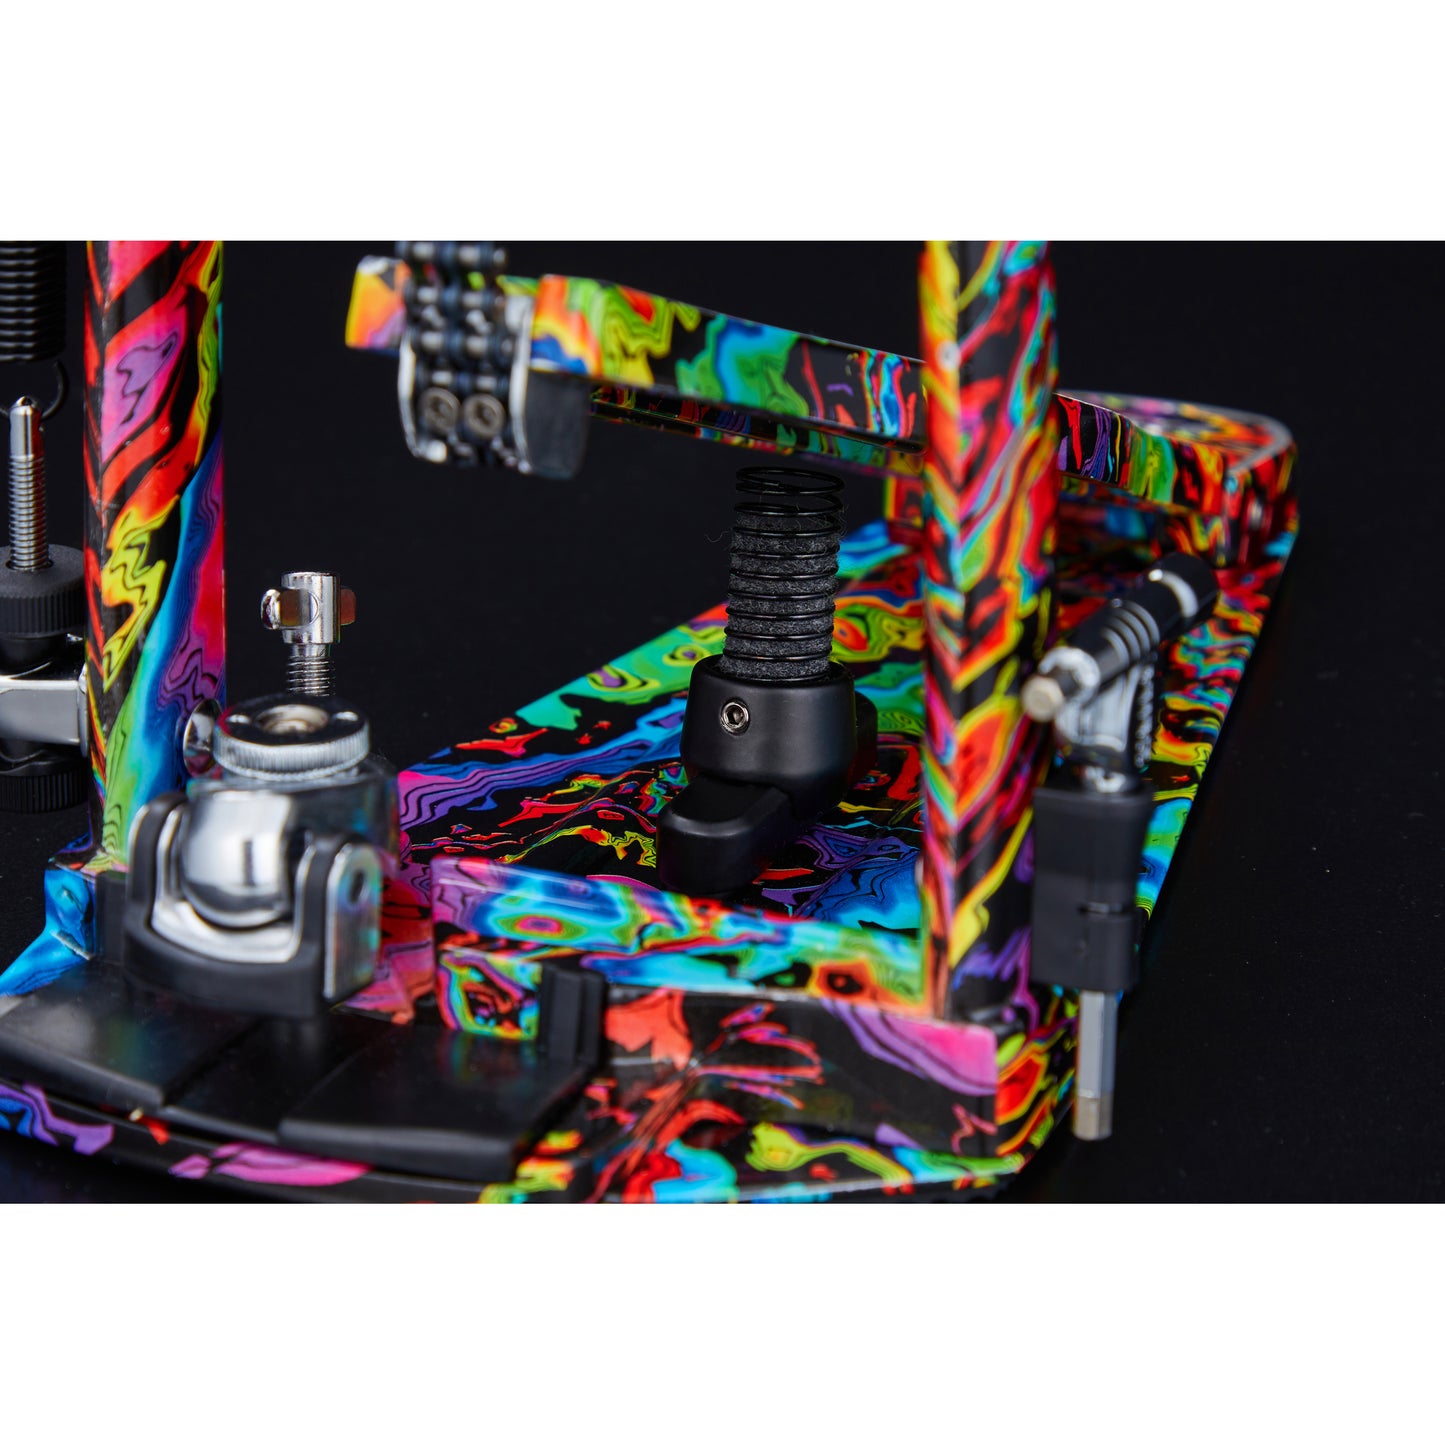 Tama 50th Anniversary Limited Edition Iron Cobra Pedal - Psychedelic Rainbow